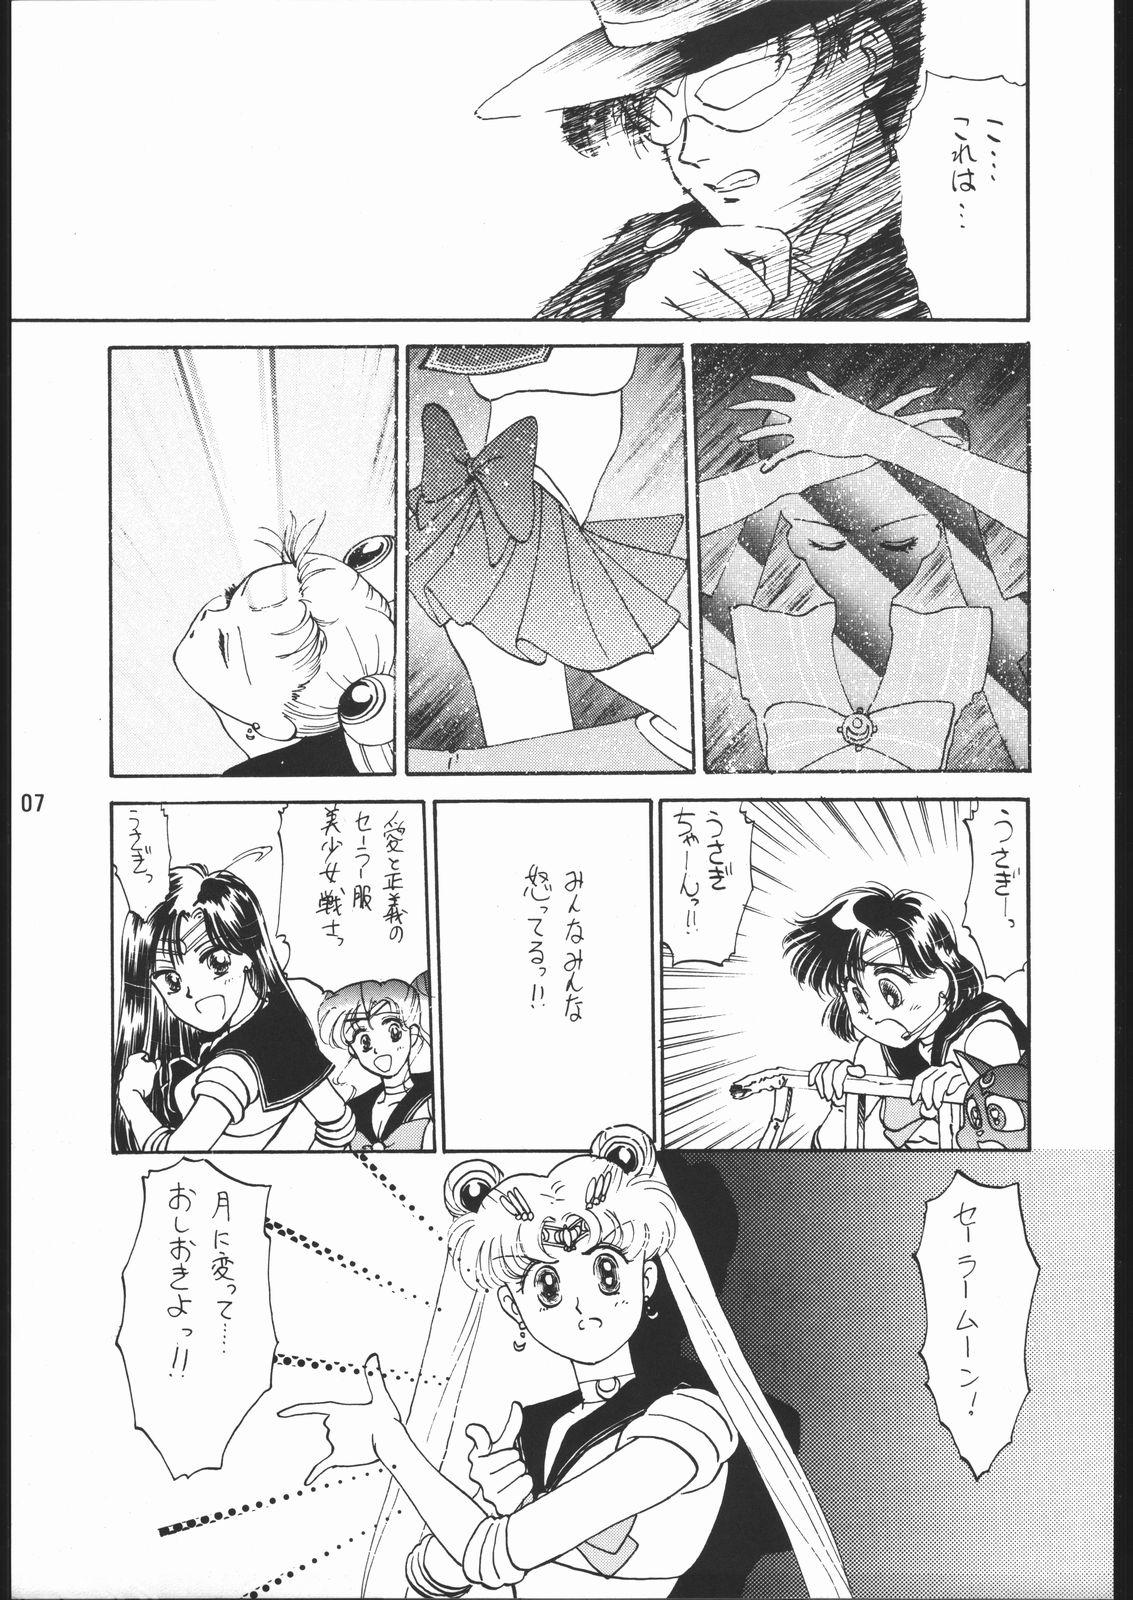 Naked Sex うさぎがピョン!! - Sailor moon Bubble Butt - Page 6